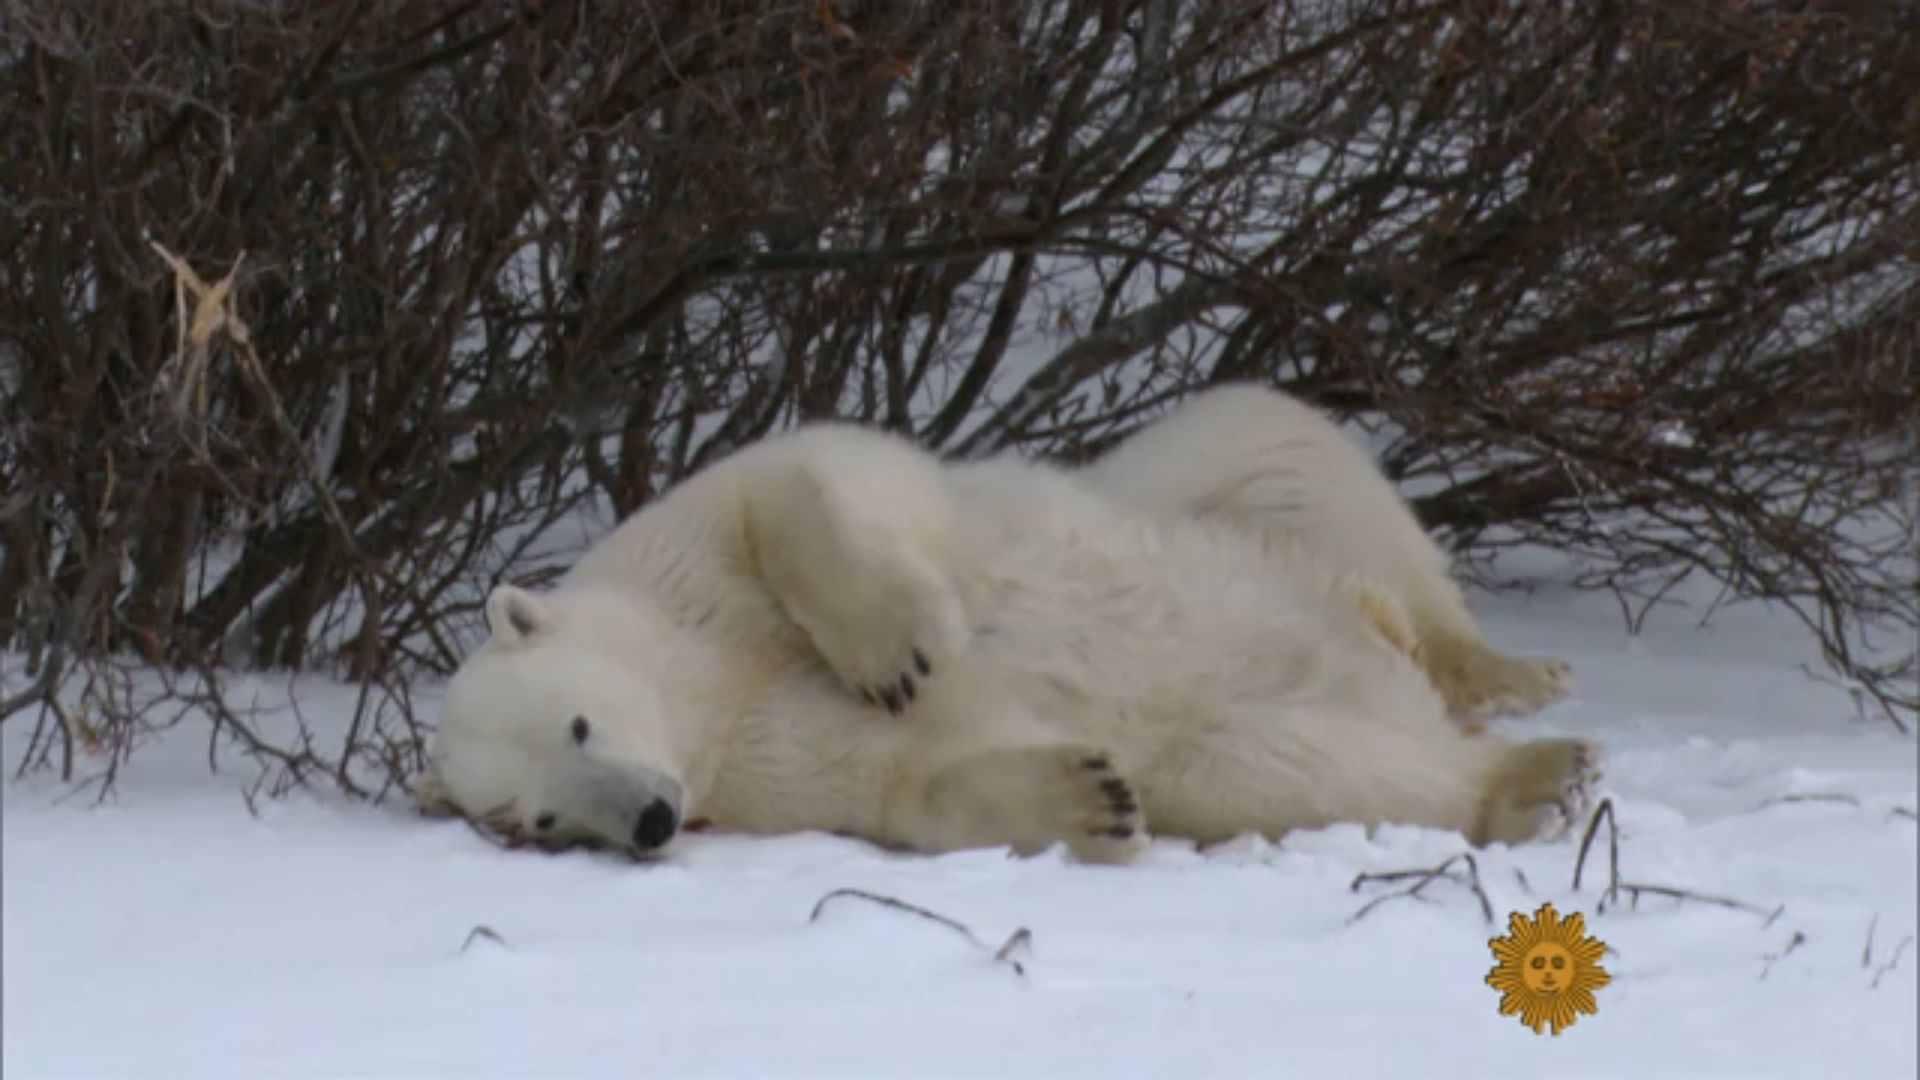 Click the image above and you'll be taken to the CBS Sunday Morning segment on polar bears.